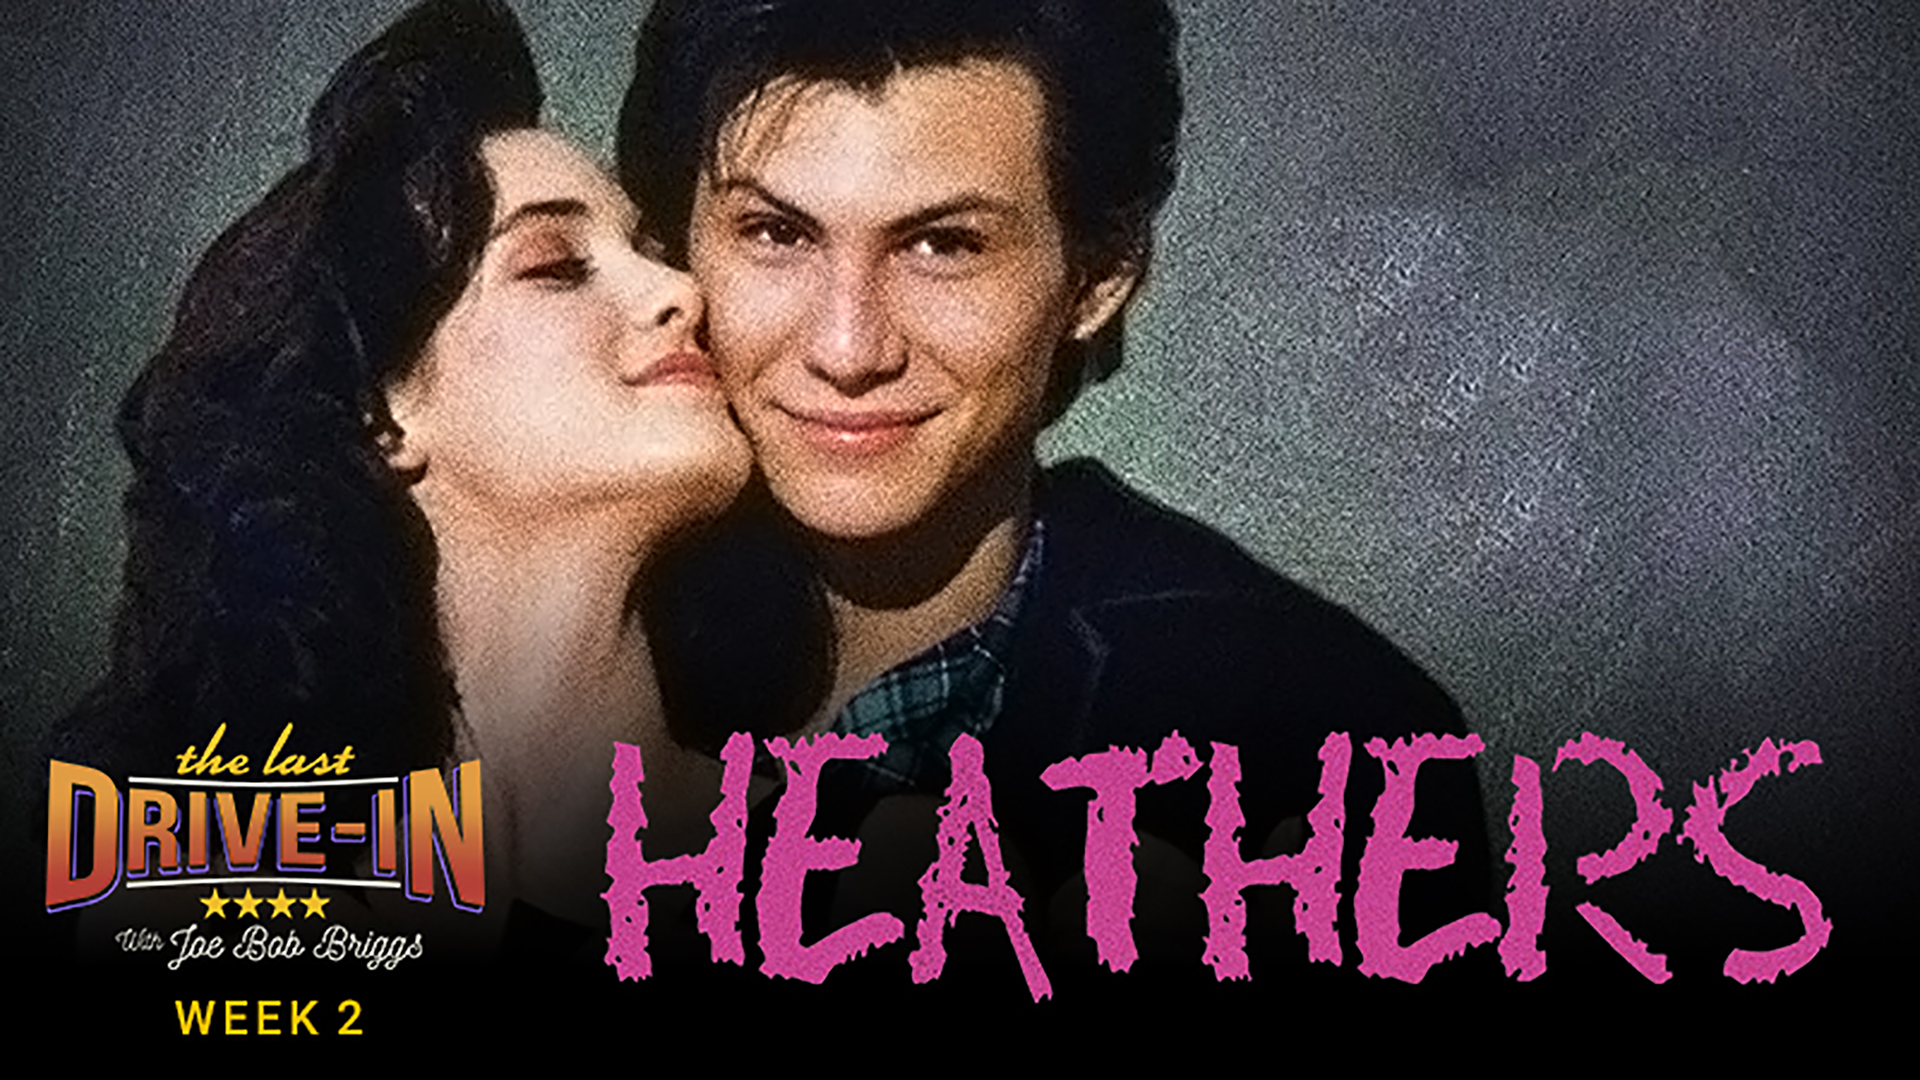 Week 2: Heathers, Winona Ryder, Christian Slater and Shannen Doherty star in this cruelly hilarious dark comedy, which became one of the biggest cult classics of the '80s., TV-MA, Season 1028422, Episode 4